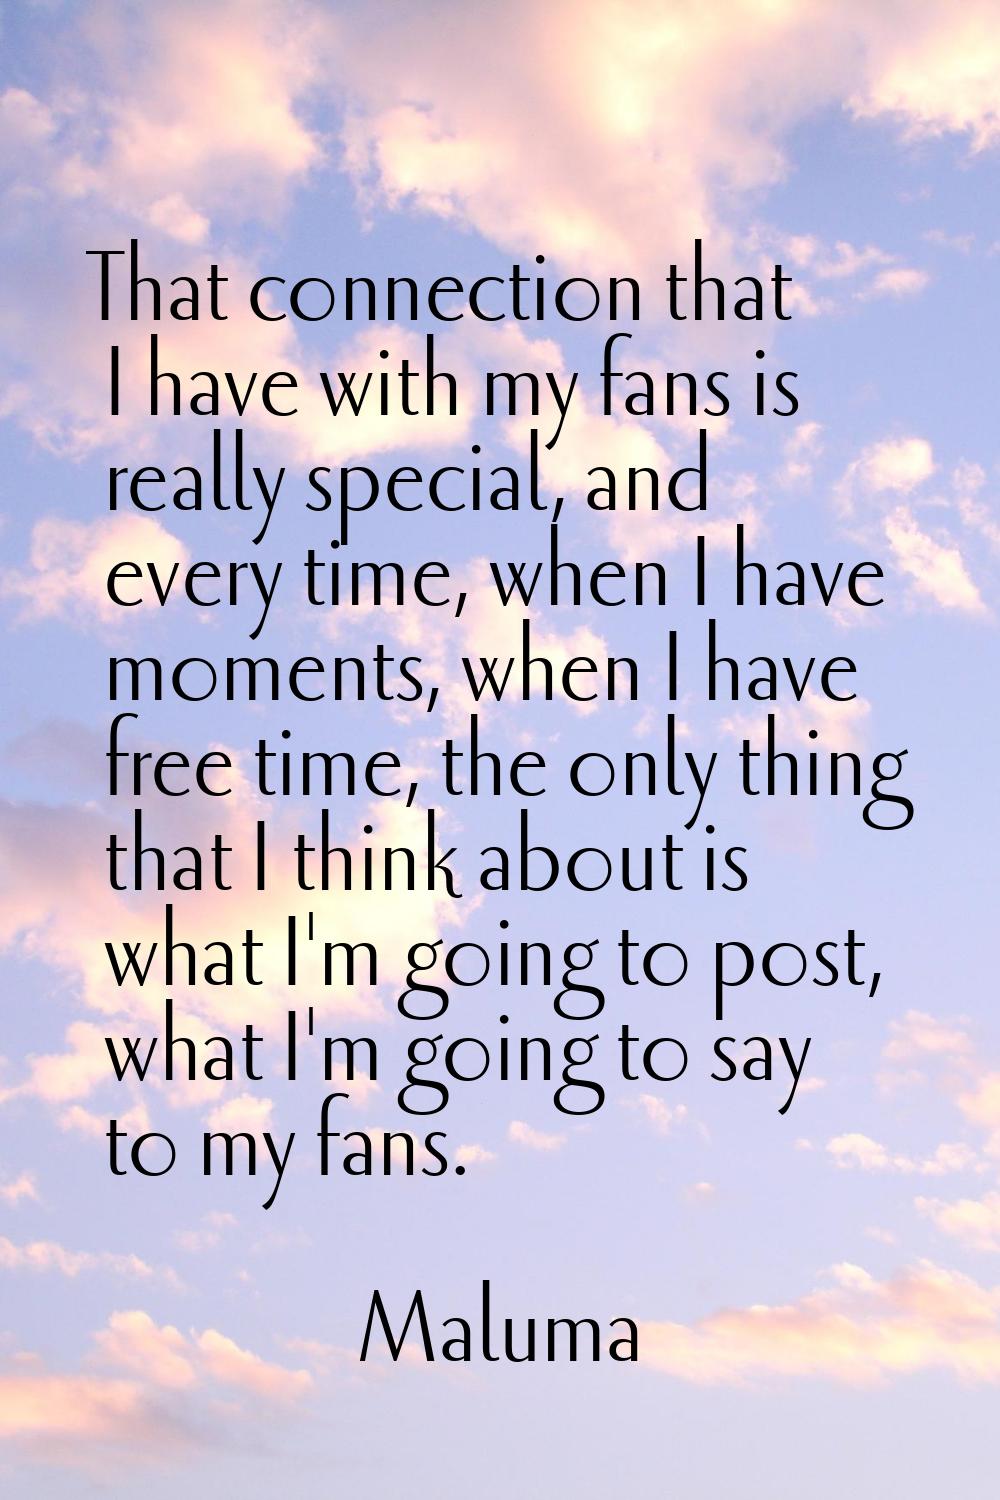 That connection that I have with my fans is really special, and every time, when I have moments, wh